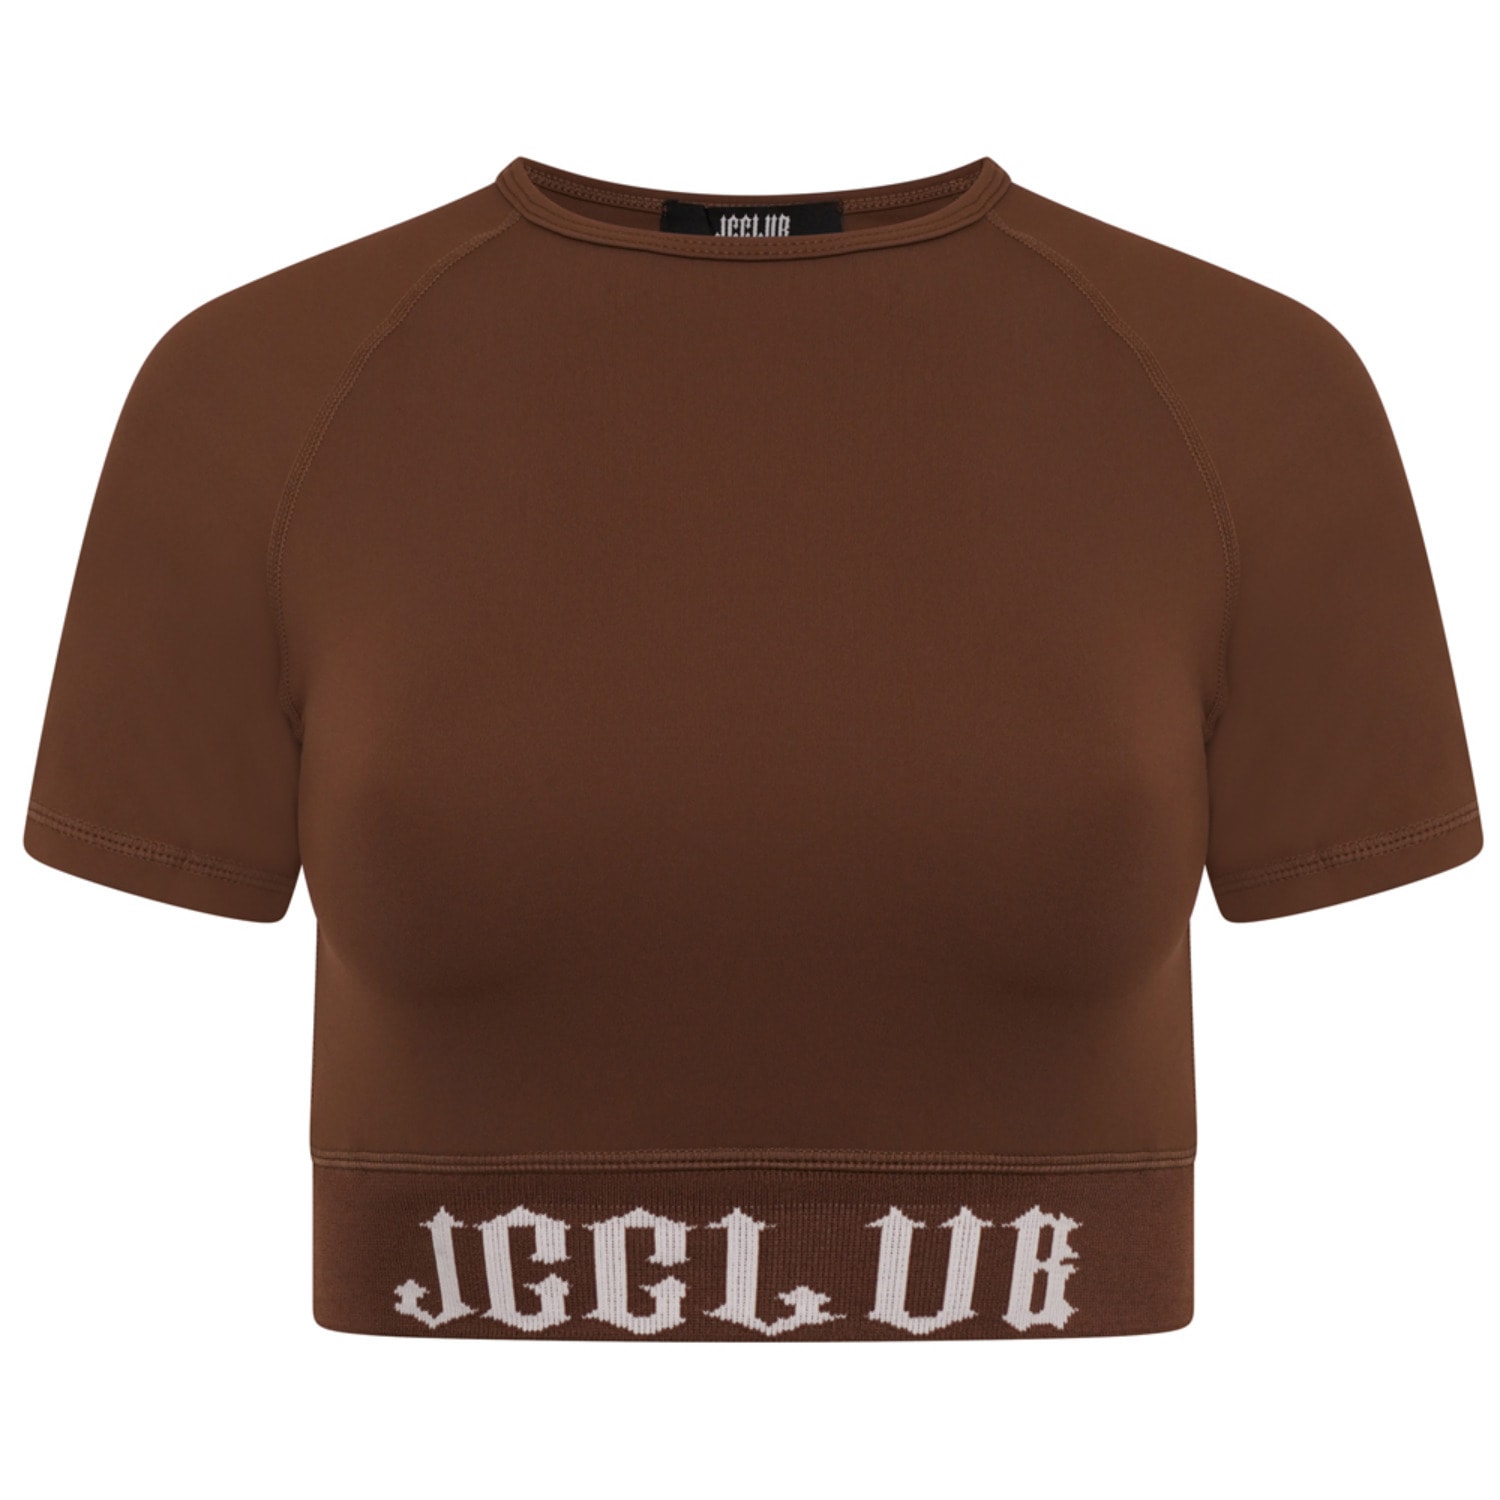 Women’s Brown Logo-Embroidered Vest Top Small Jcclub